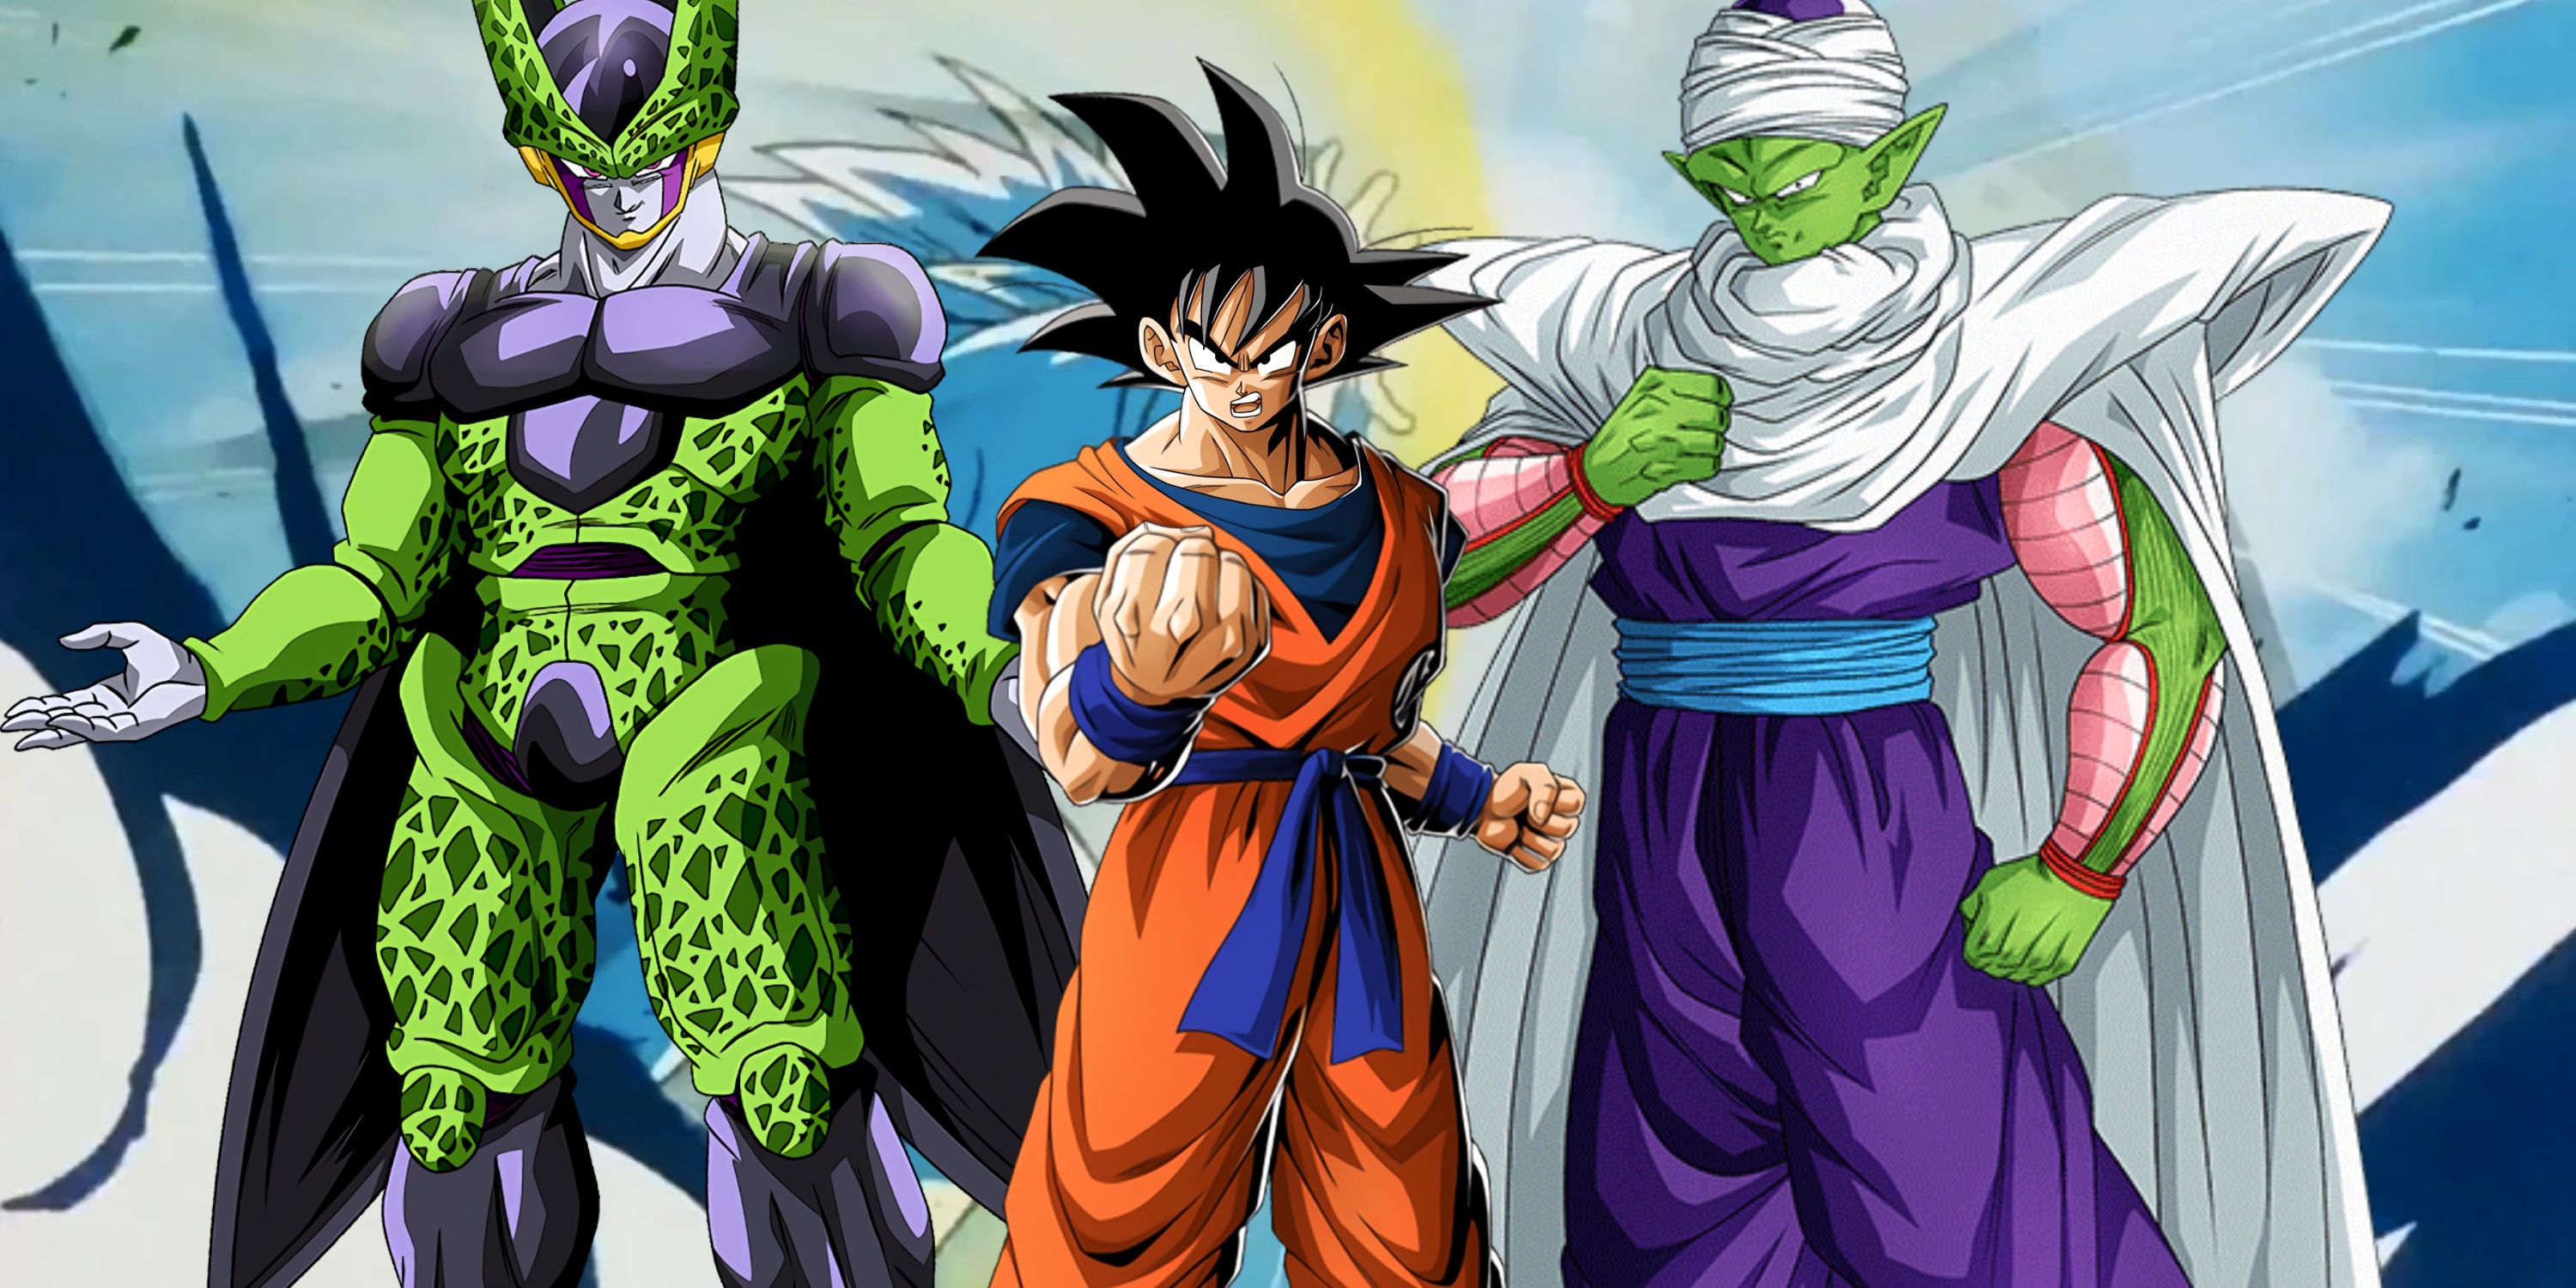 5 Most Creative Fighters In Dragon Ball, Ranked Goku Piccolo Perfect Cell - Featured